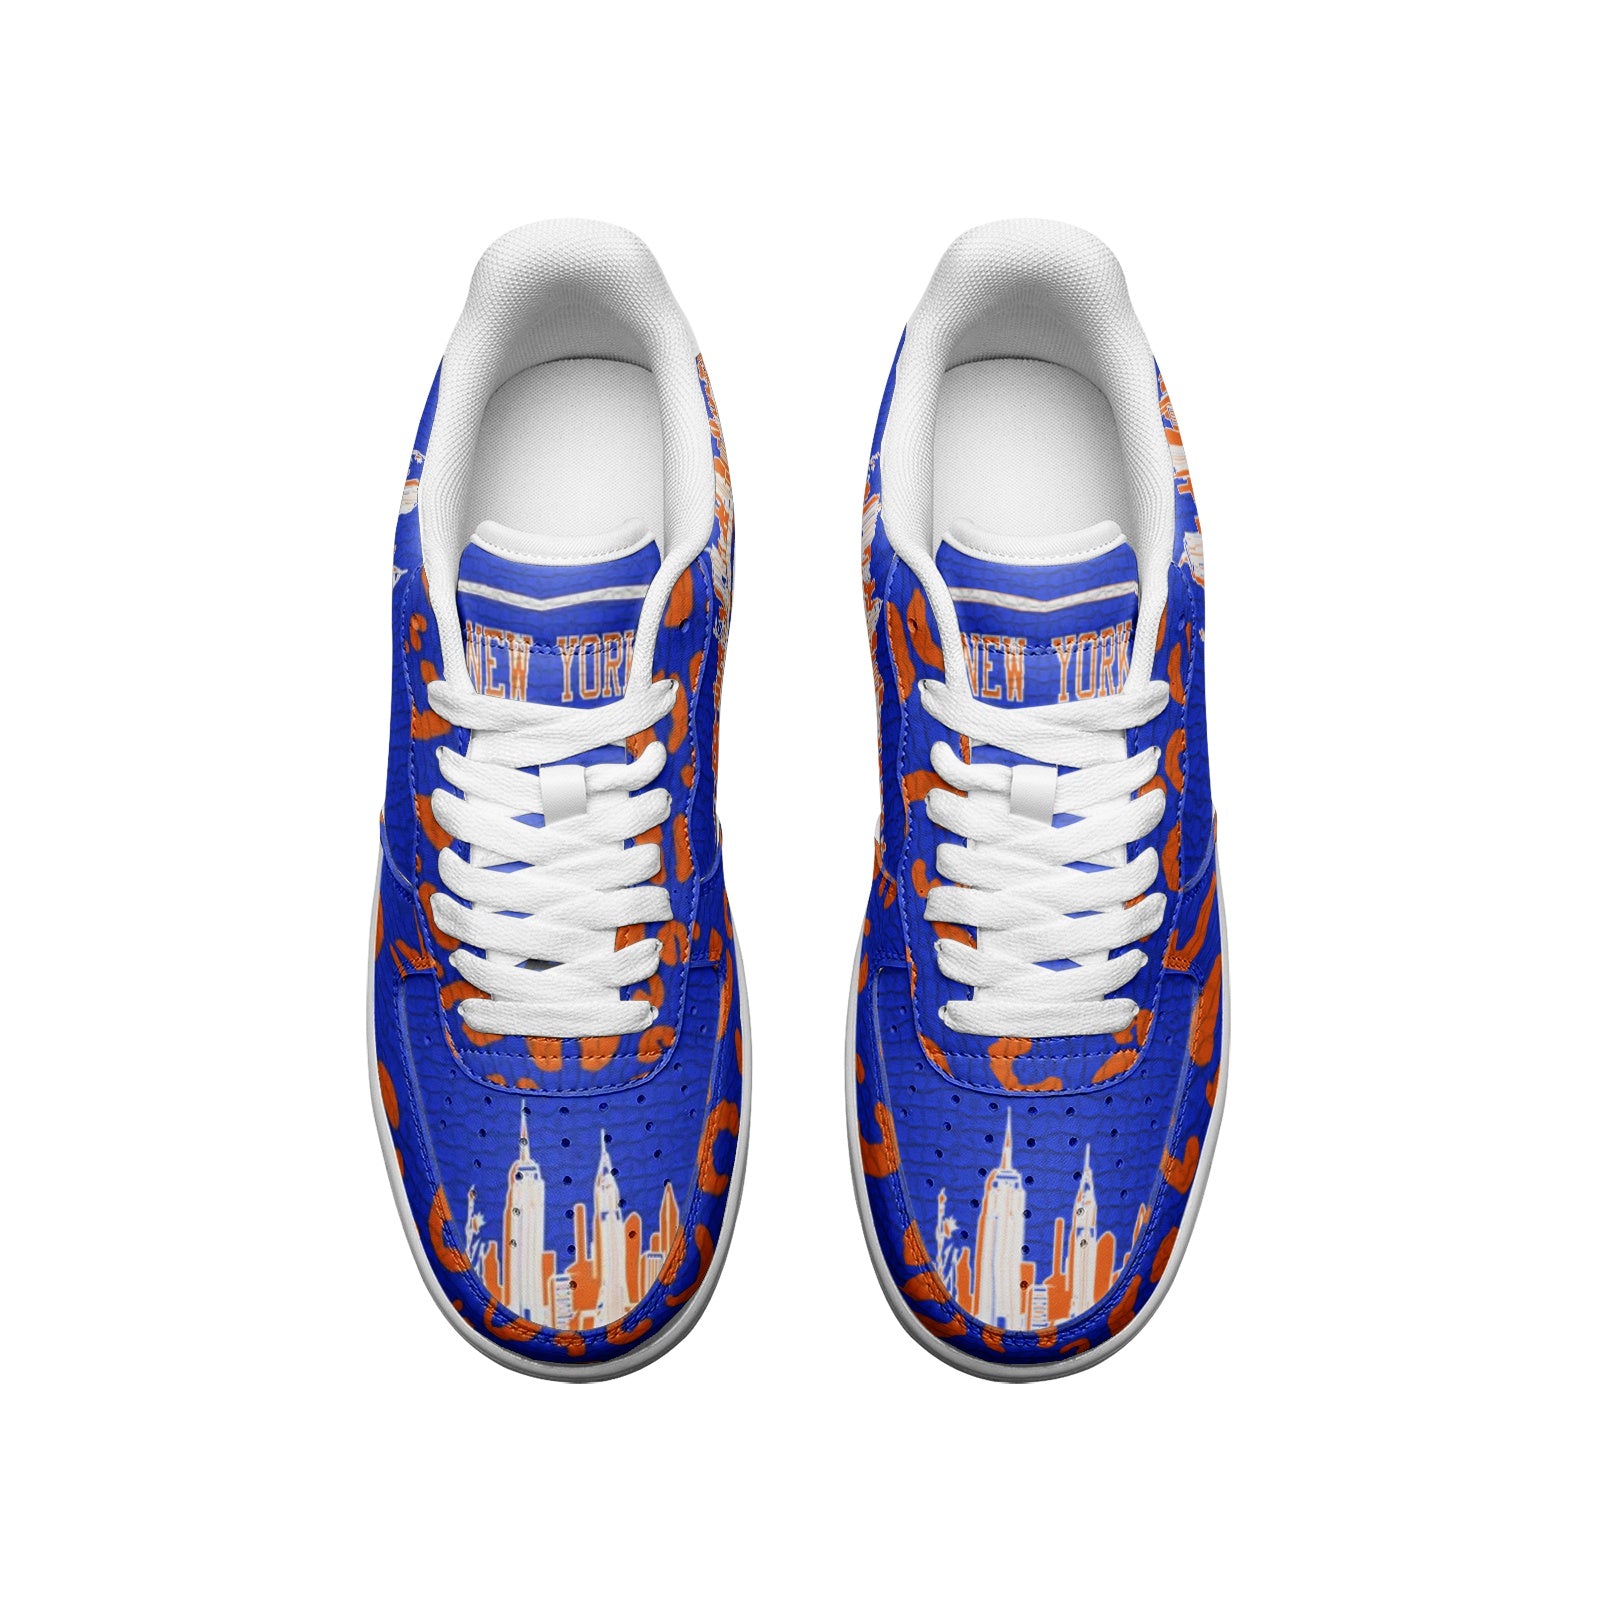 New York Knicks Colour Way Low Top Force Leather Sneakers